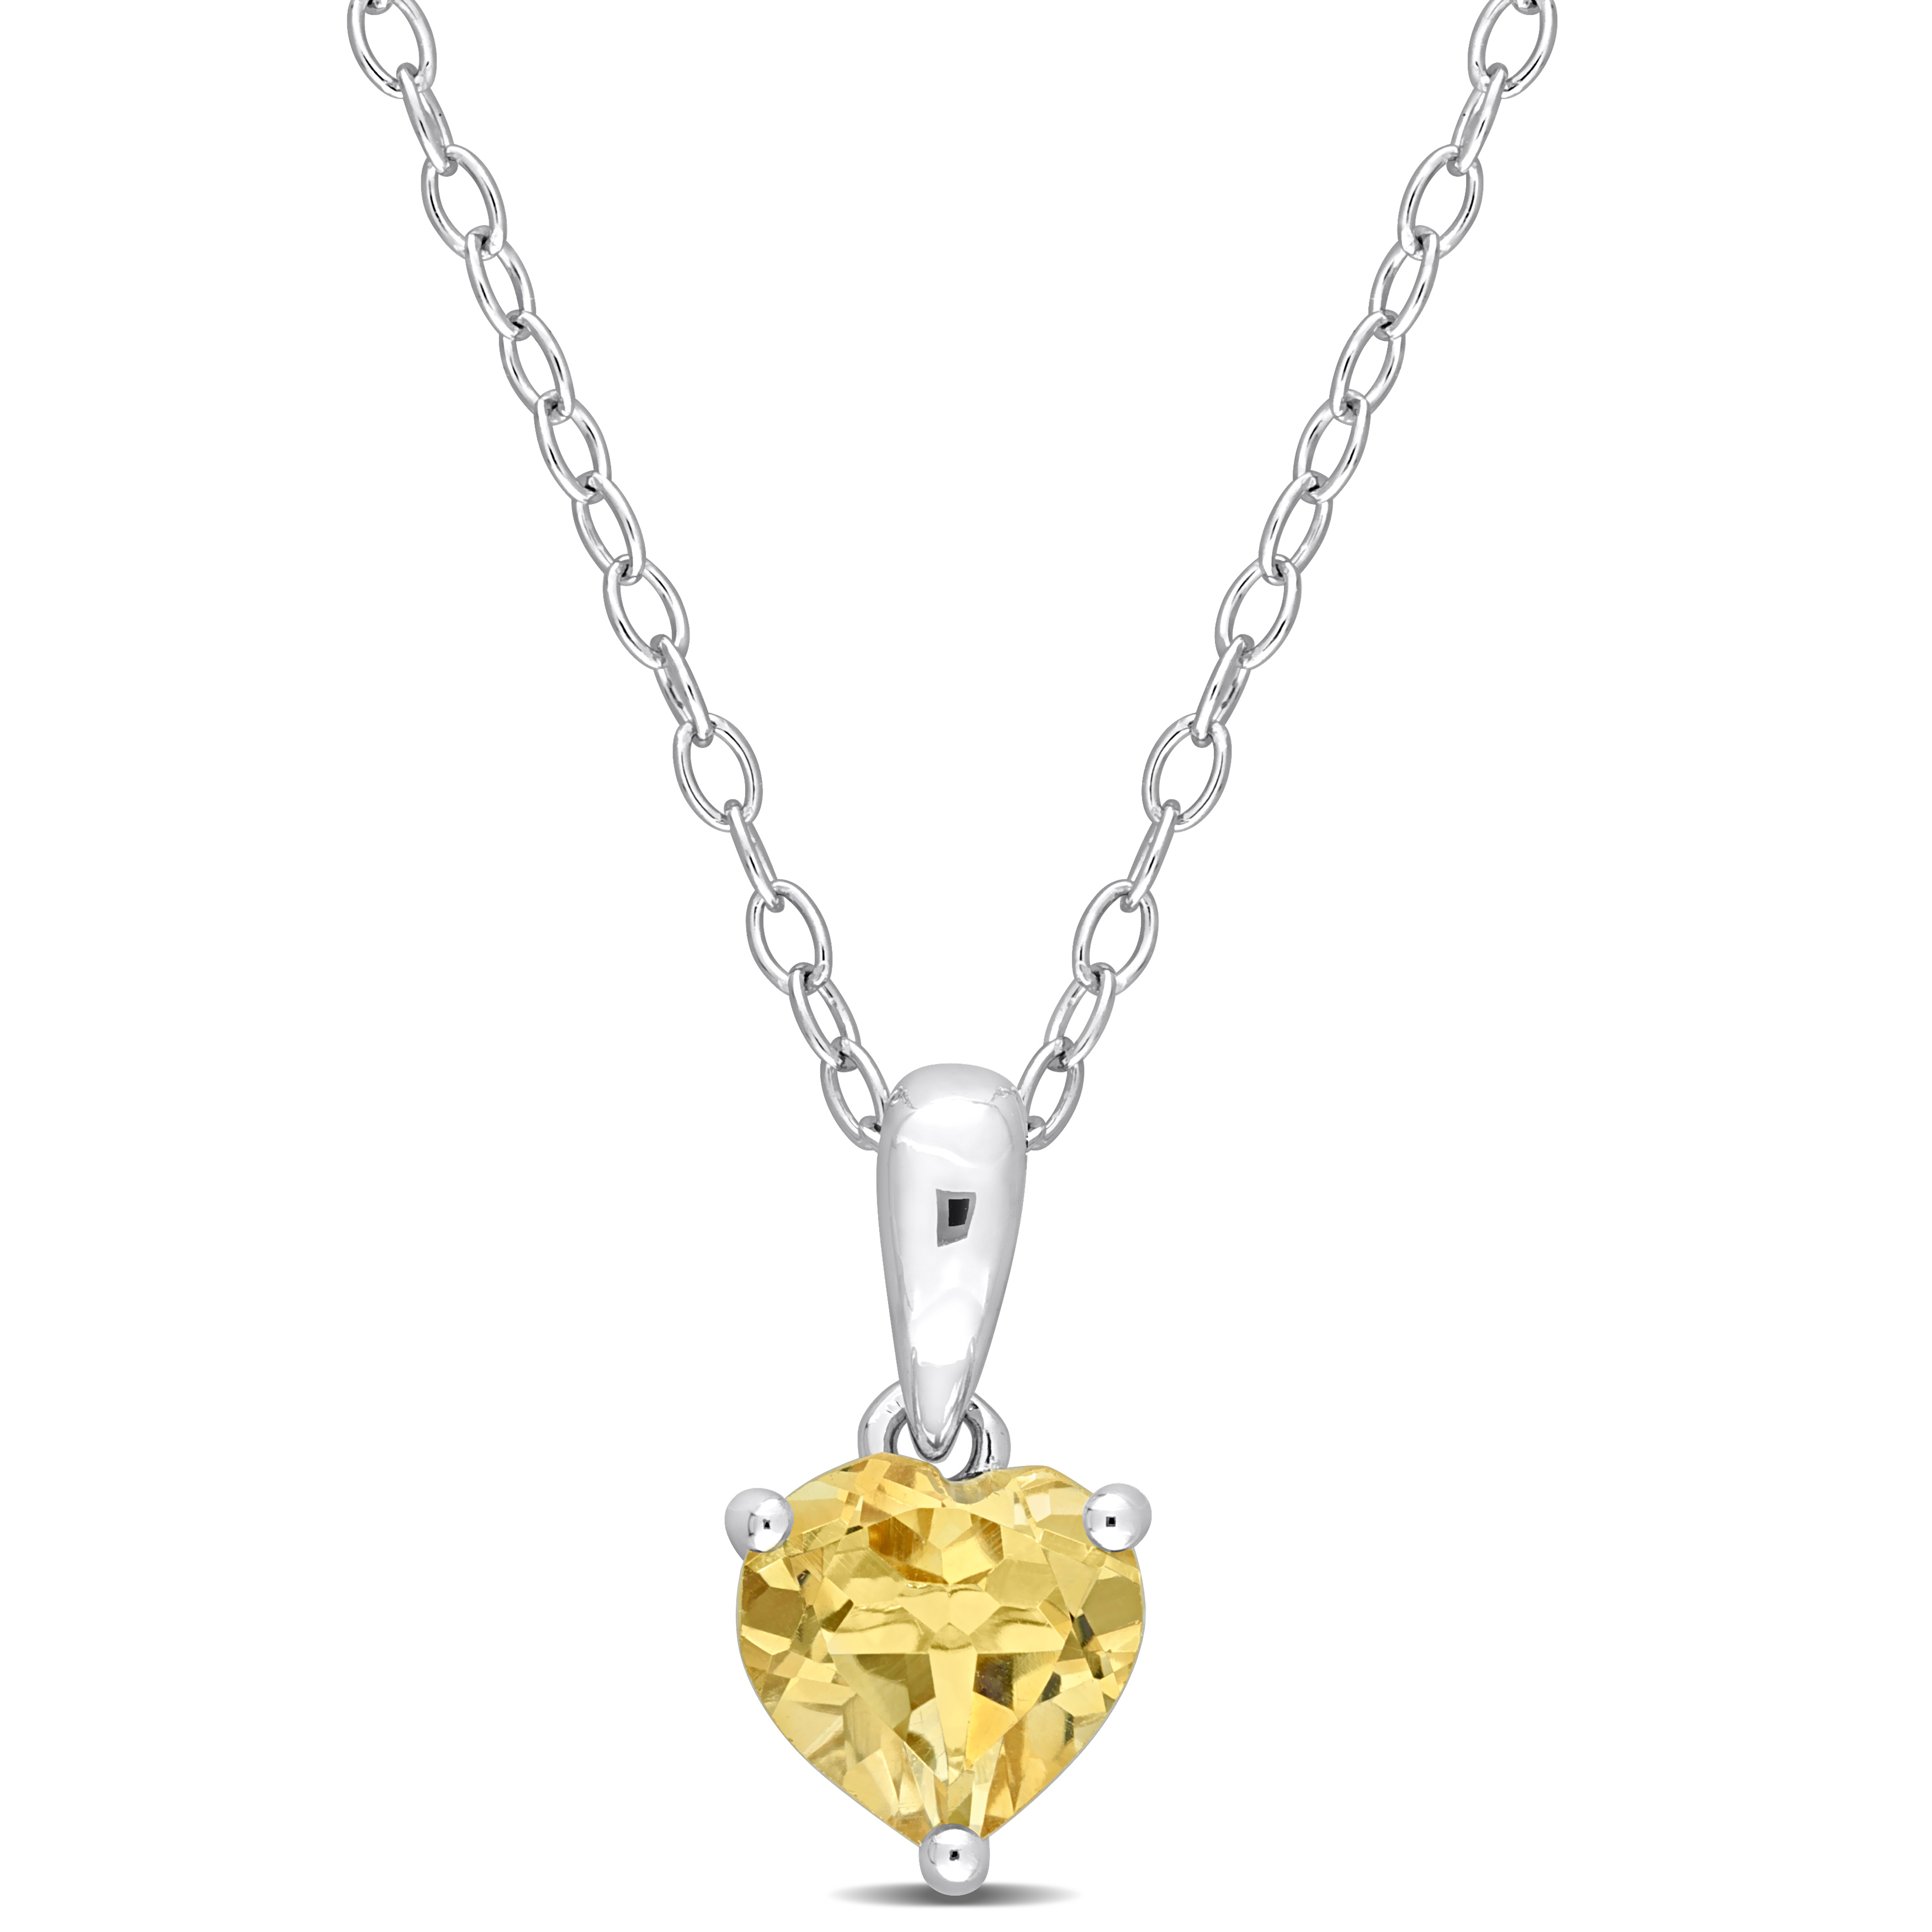 3/4 CT TGW Heart Shape Citrine Solitaire Heart Design Pendant with Chain in Sterling Silver - 18 in.